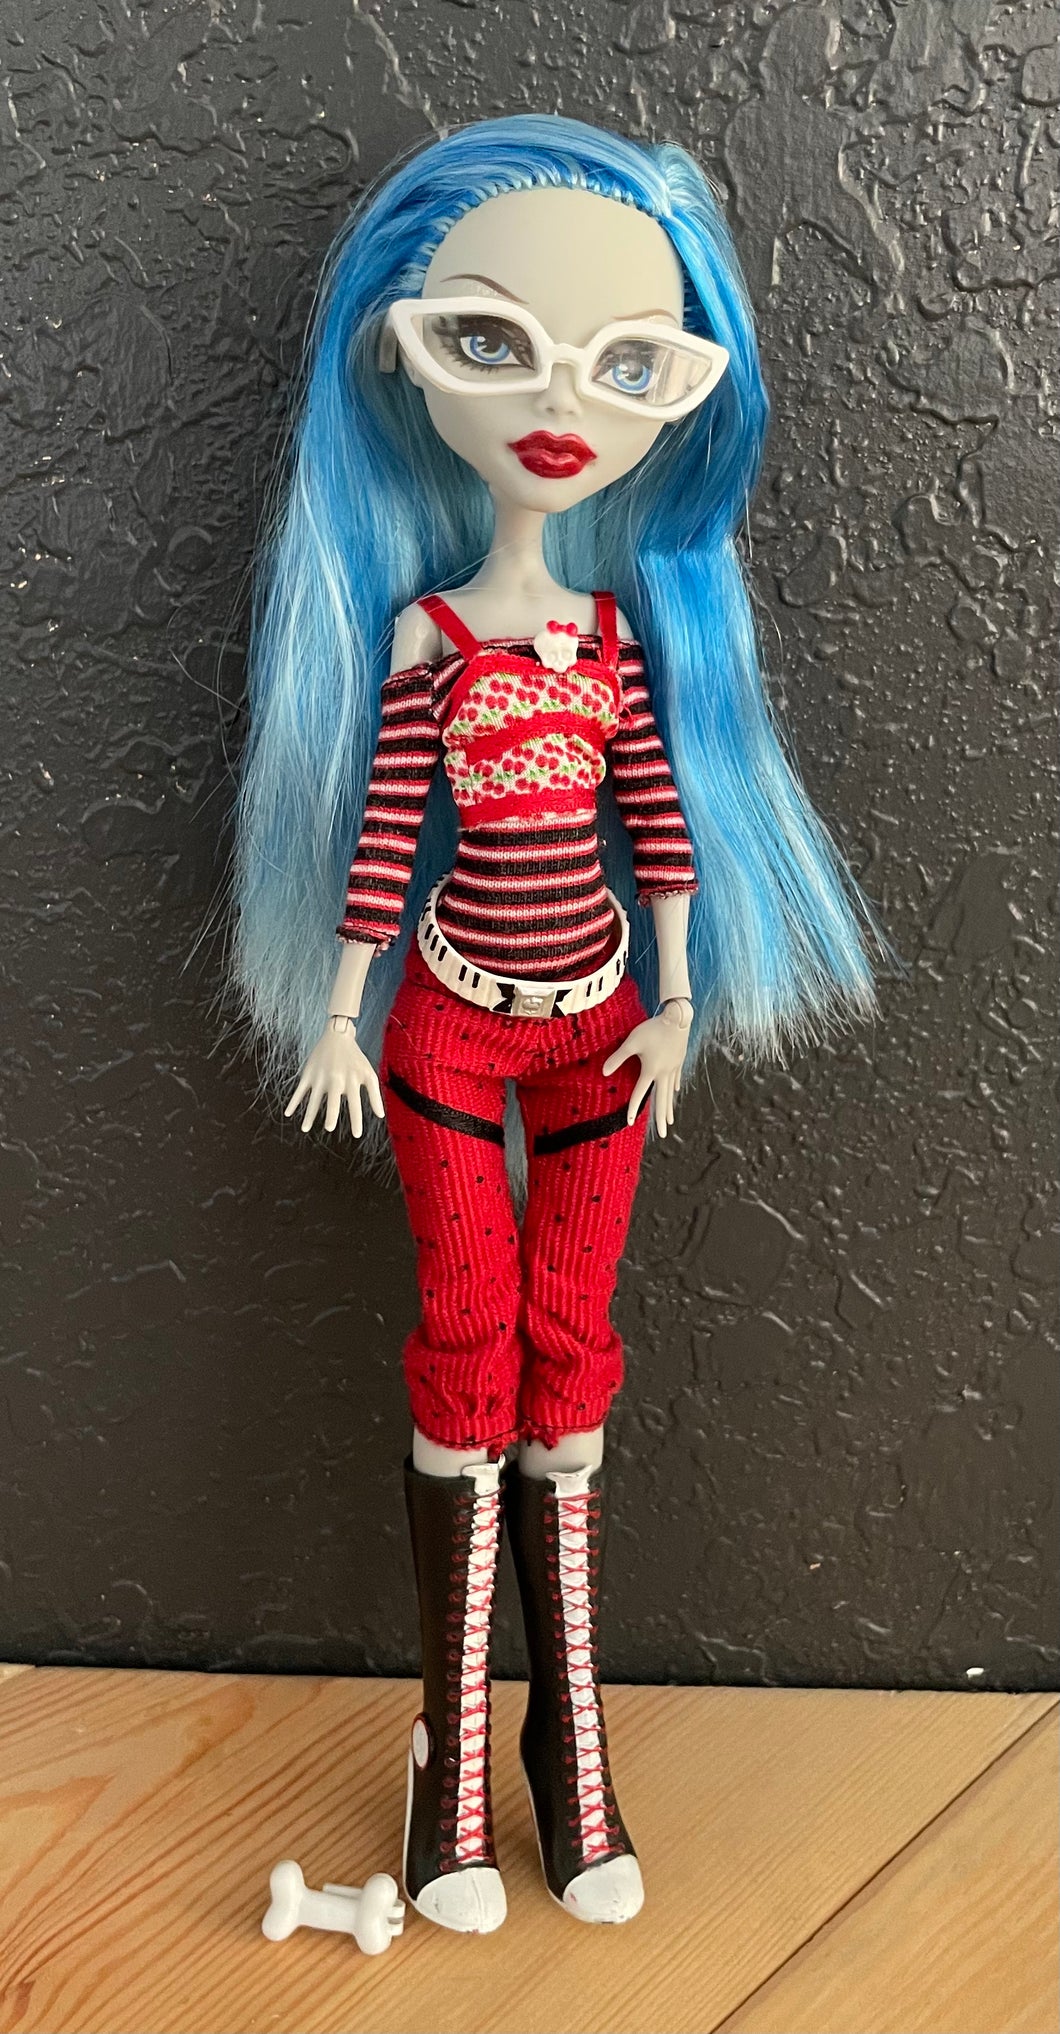 Mattel Monster High Ghoulia Yelps First Wave Doll